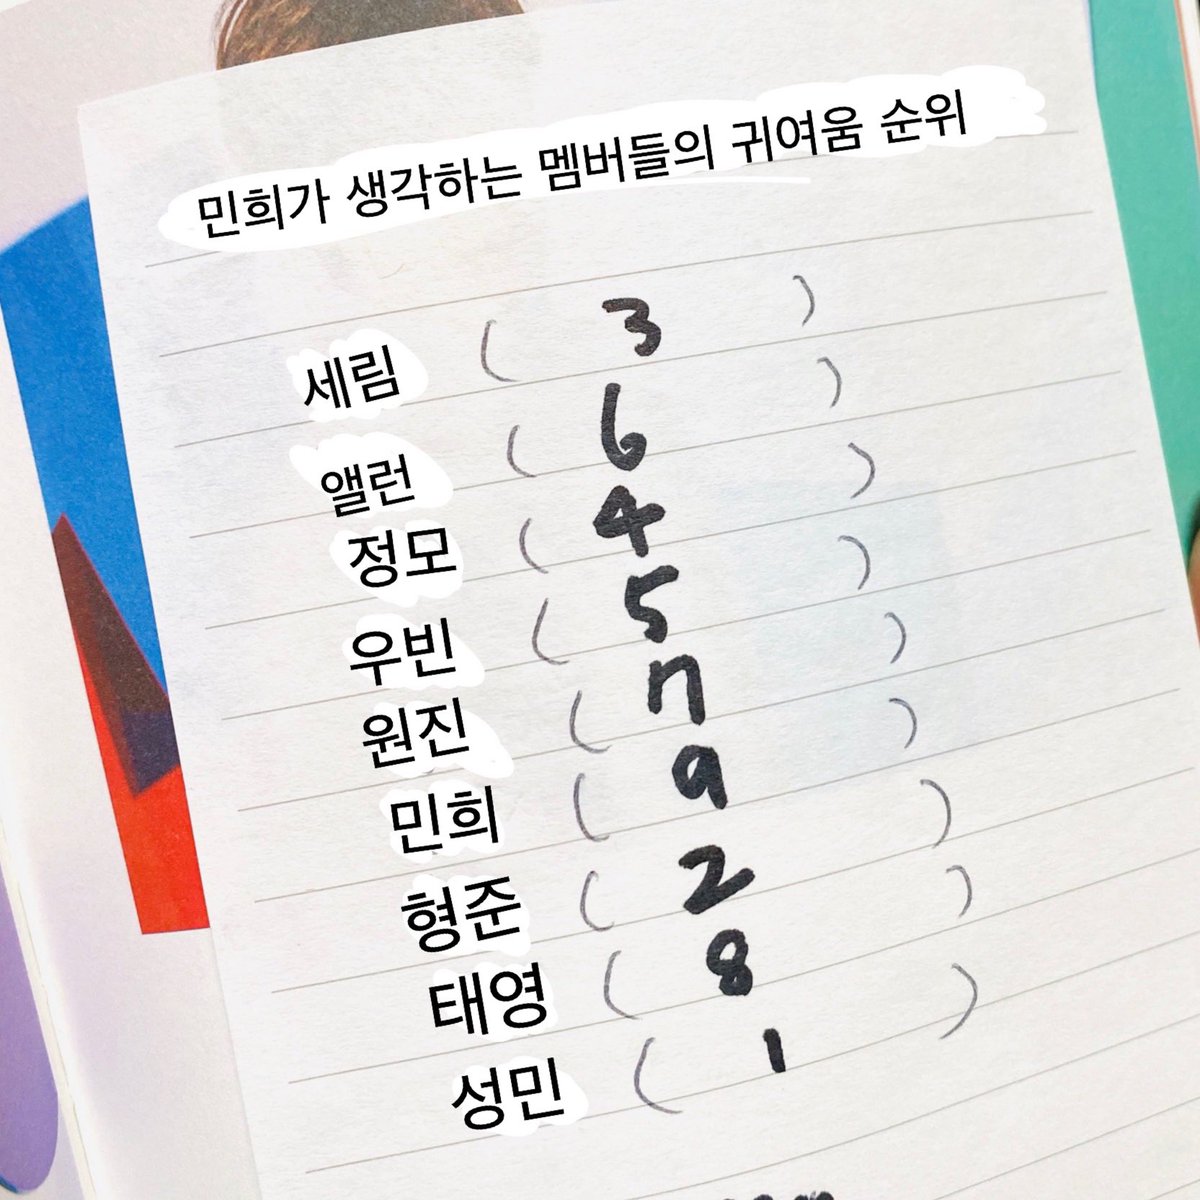 these are literally just from today "!4(&(55seongmin saying that minhee is the member he likes the most these days, minhee ranking seongmin as the cutest member, and then seongmin choosing minhee to be his bias if he was a luvity cause "minhee is cute" 